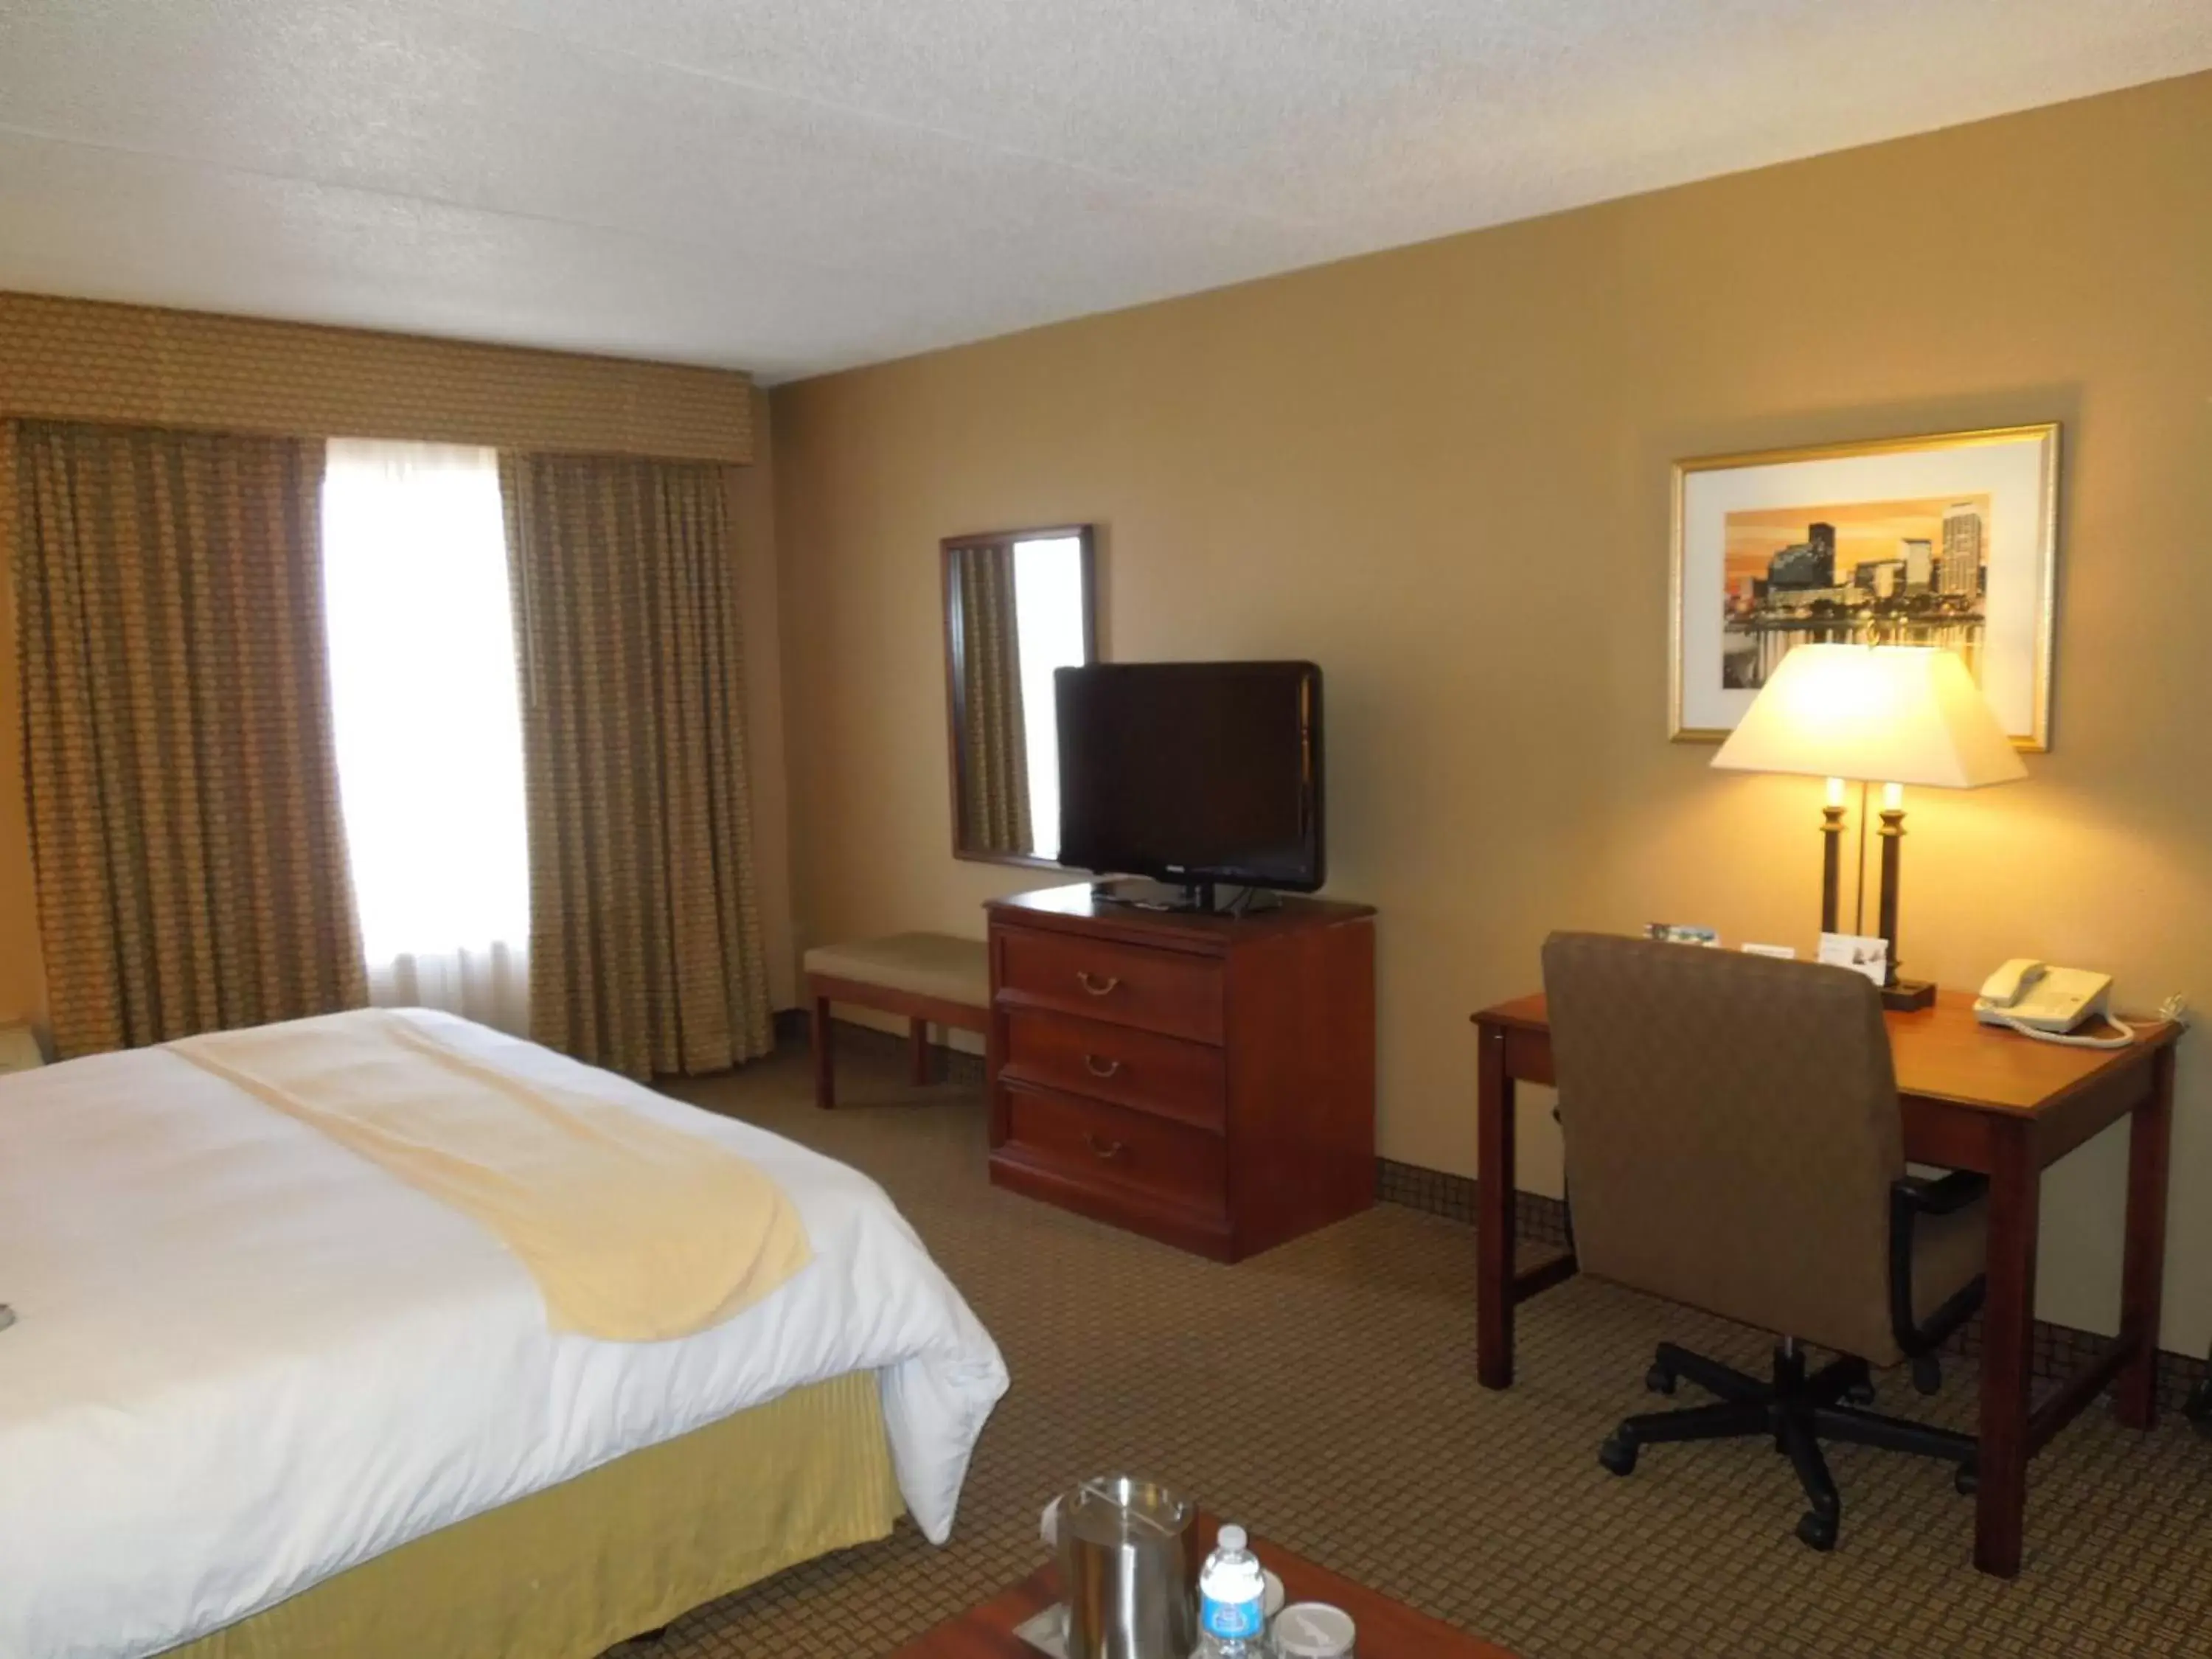 Bedroom, TV/Entertainment Center in Radisson Cleveland Airport